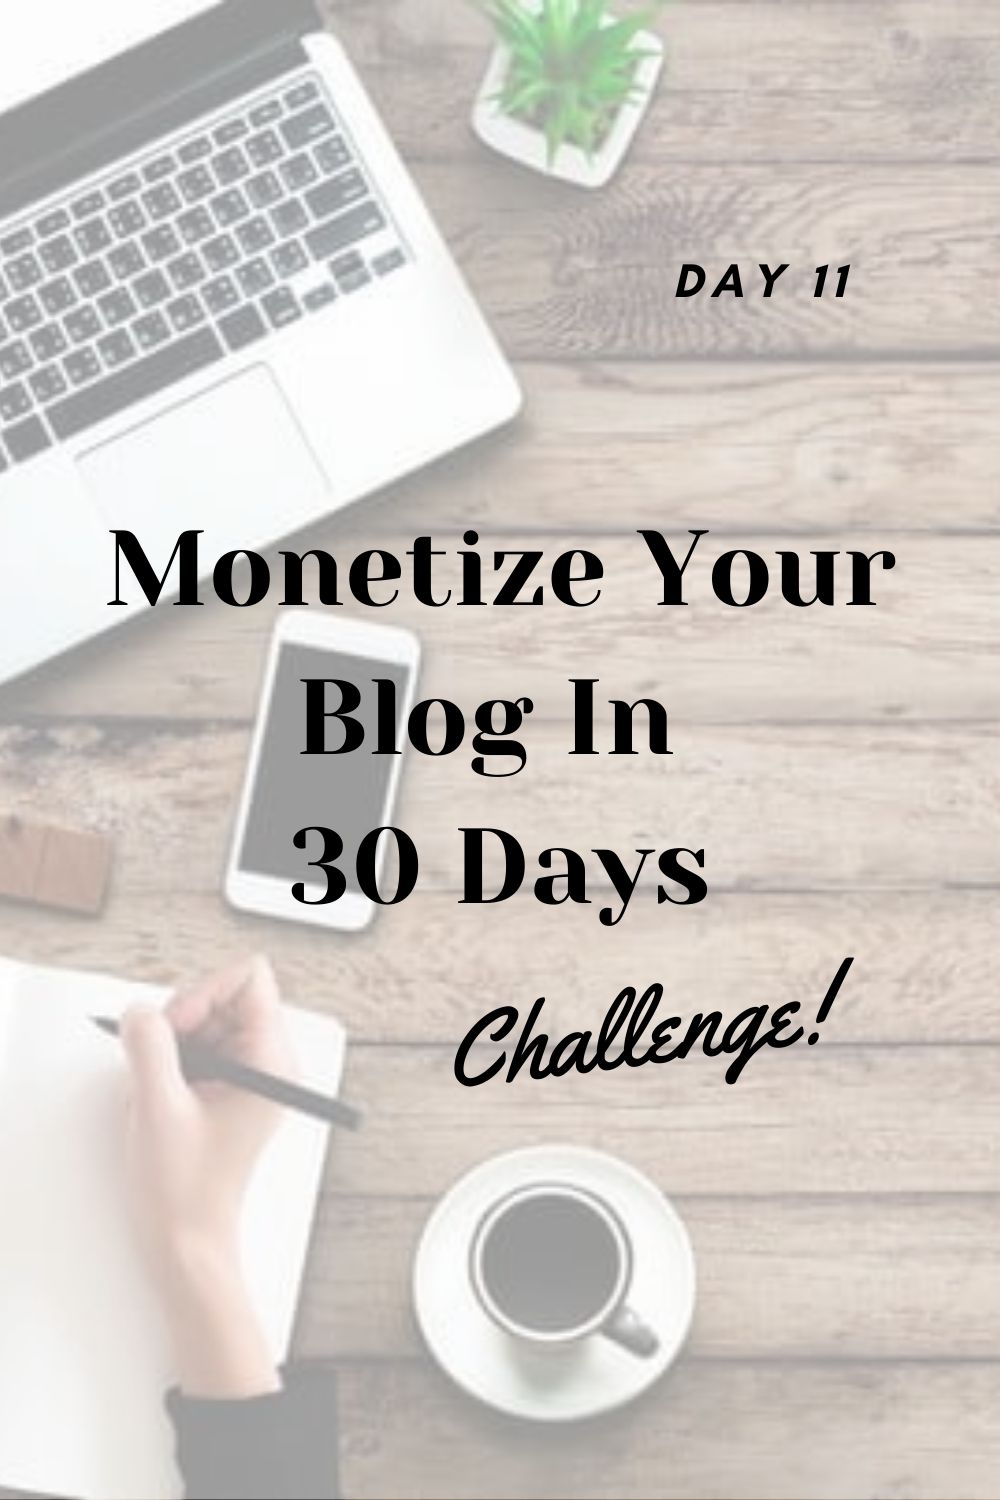 Monetize Your Blog by Writing a Book